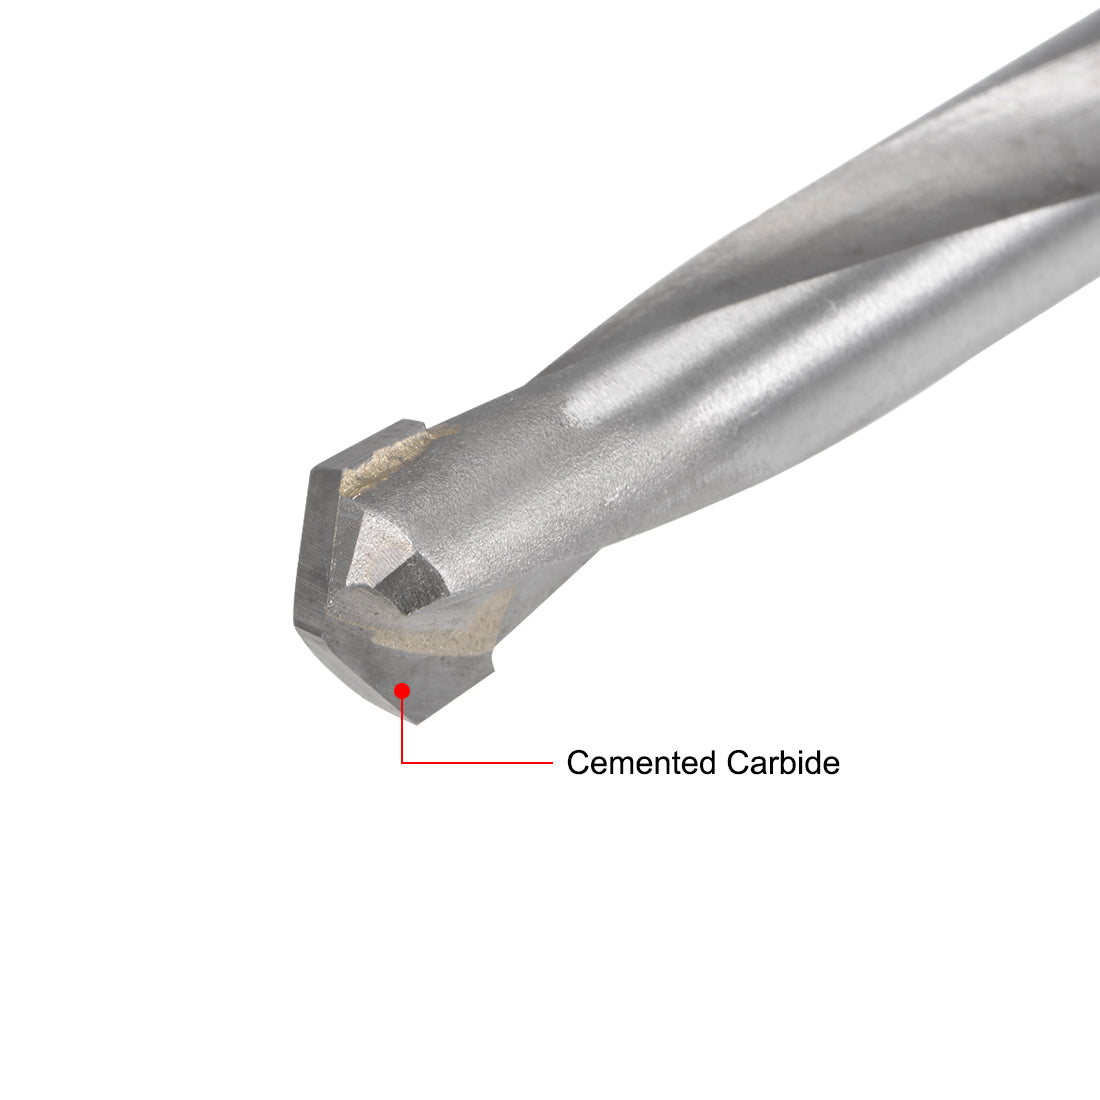 uxcell Uxcell 12.5mm Cemented Carbide Twist Drill Bit for Stainless Steel Copper Aluminum 2Pcs